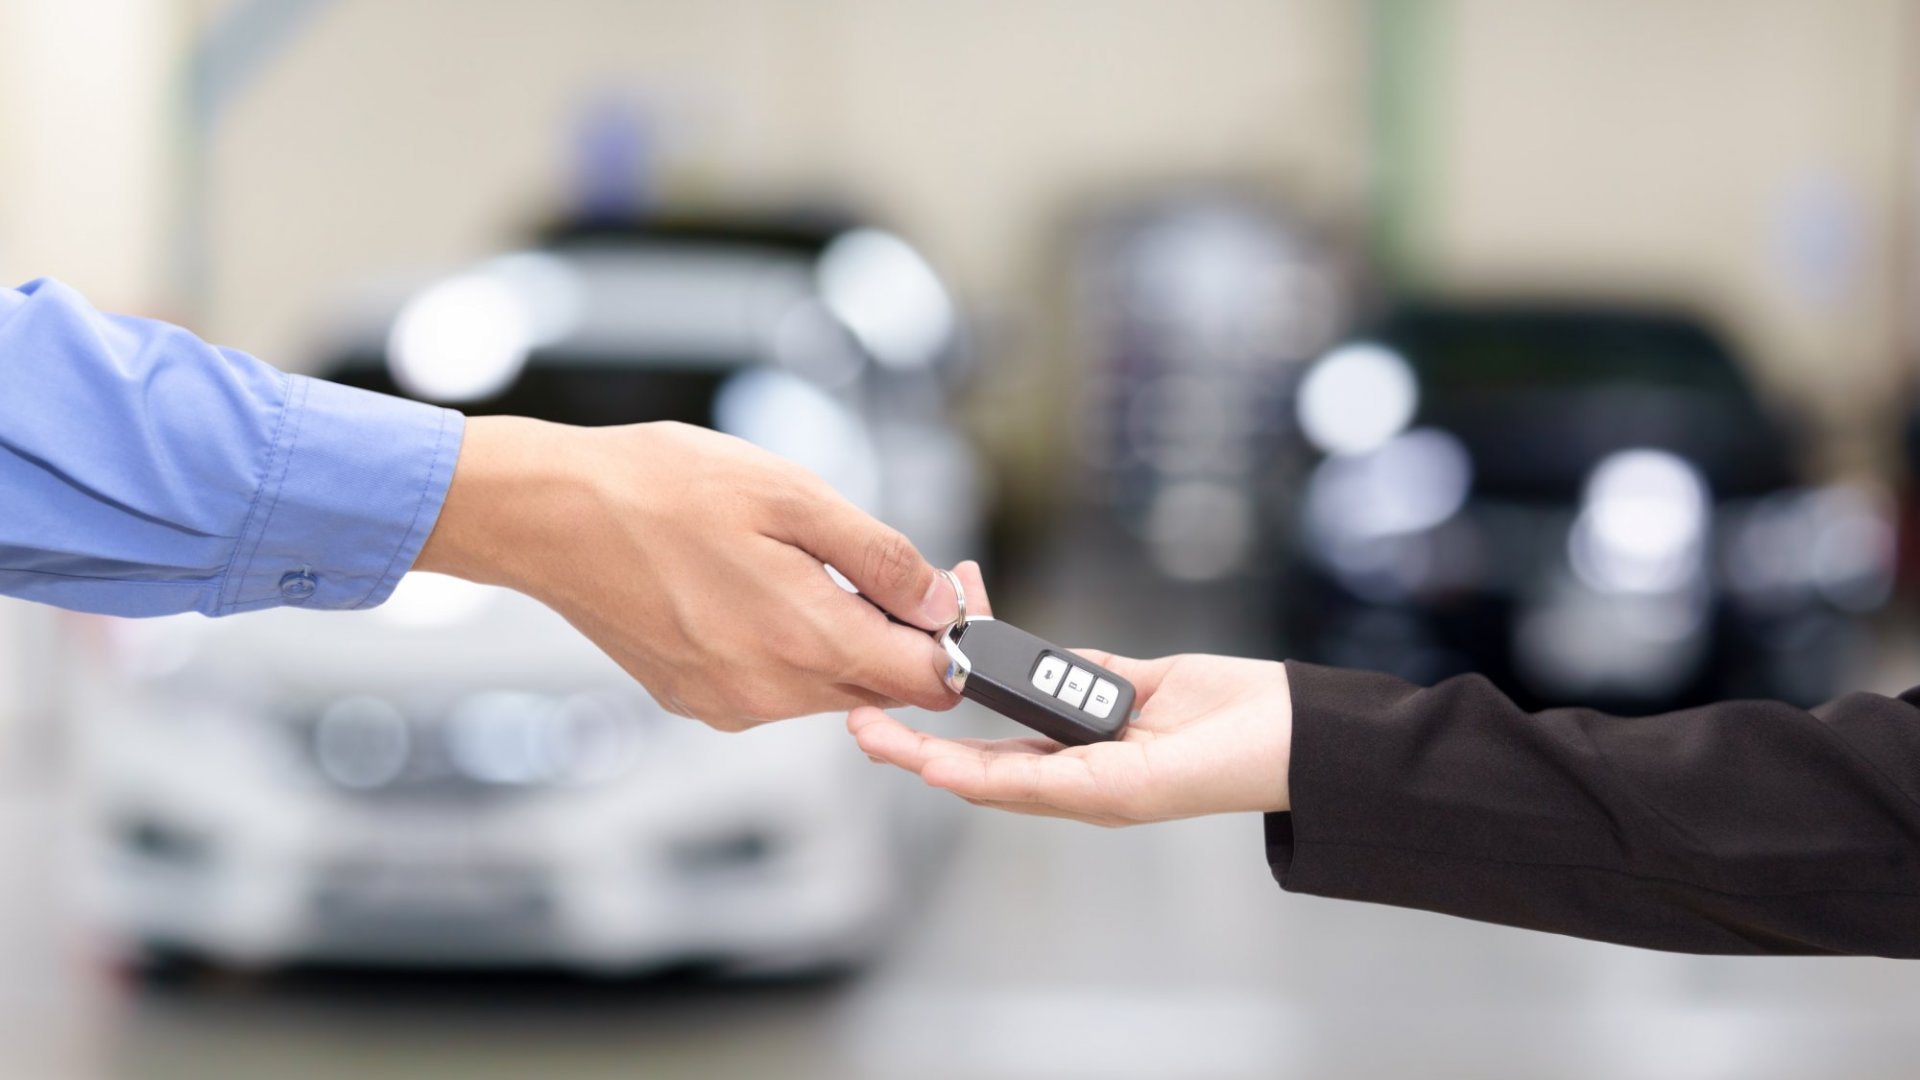 Top Ten Things to Not Do When Renting A Car luxlive